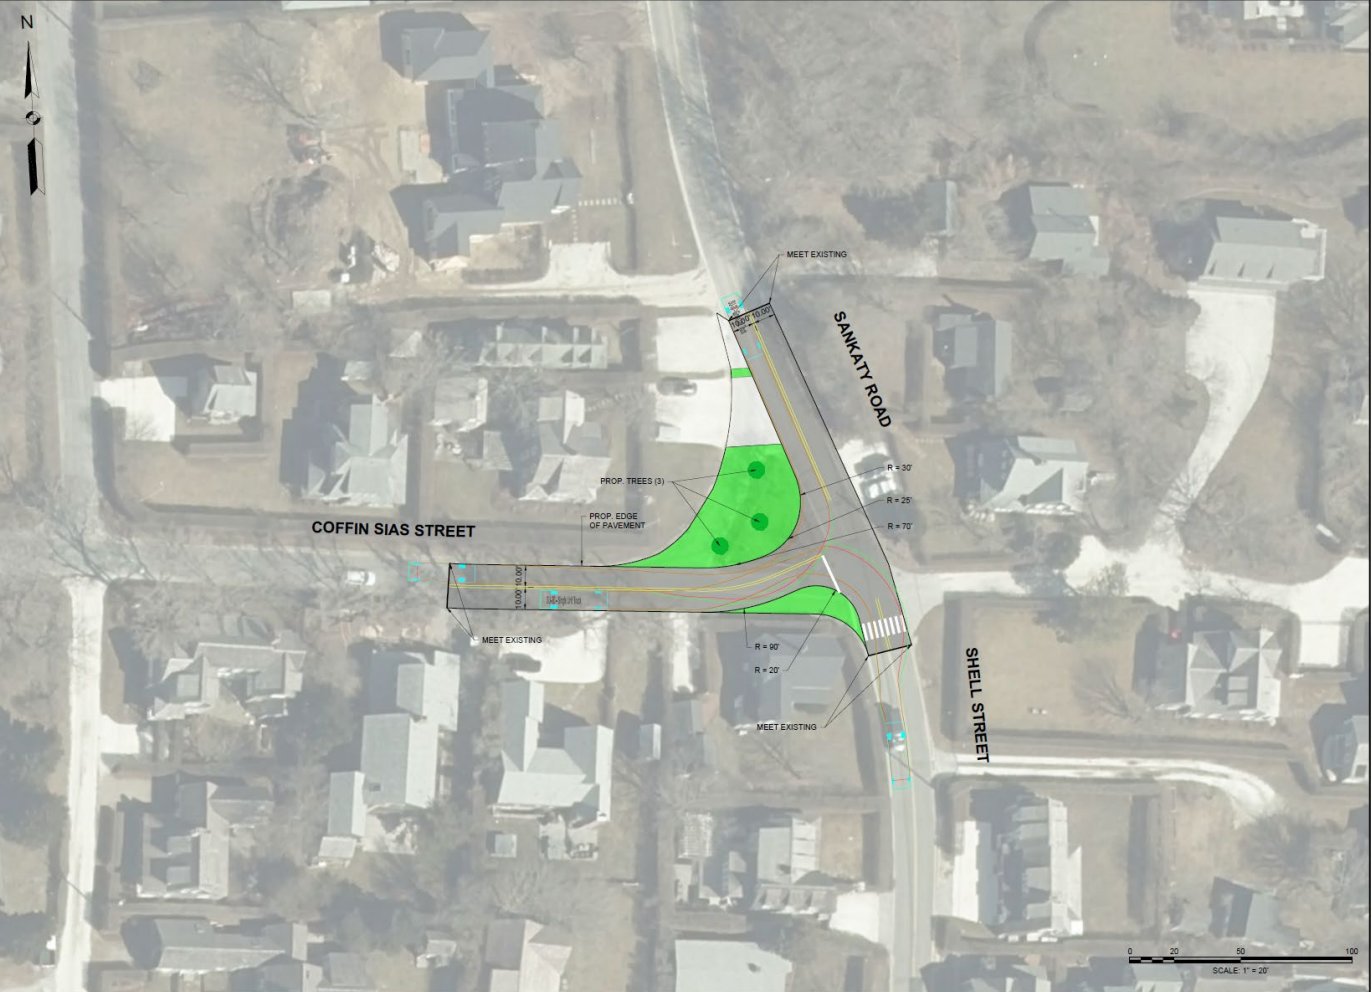 The intersection of Sankaty Road and Coffin Street in Sconset will be reconfigured to improve traffic safety and visibility.